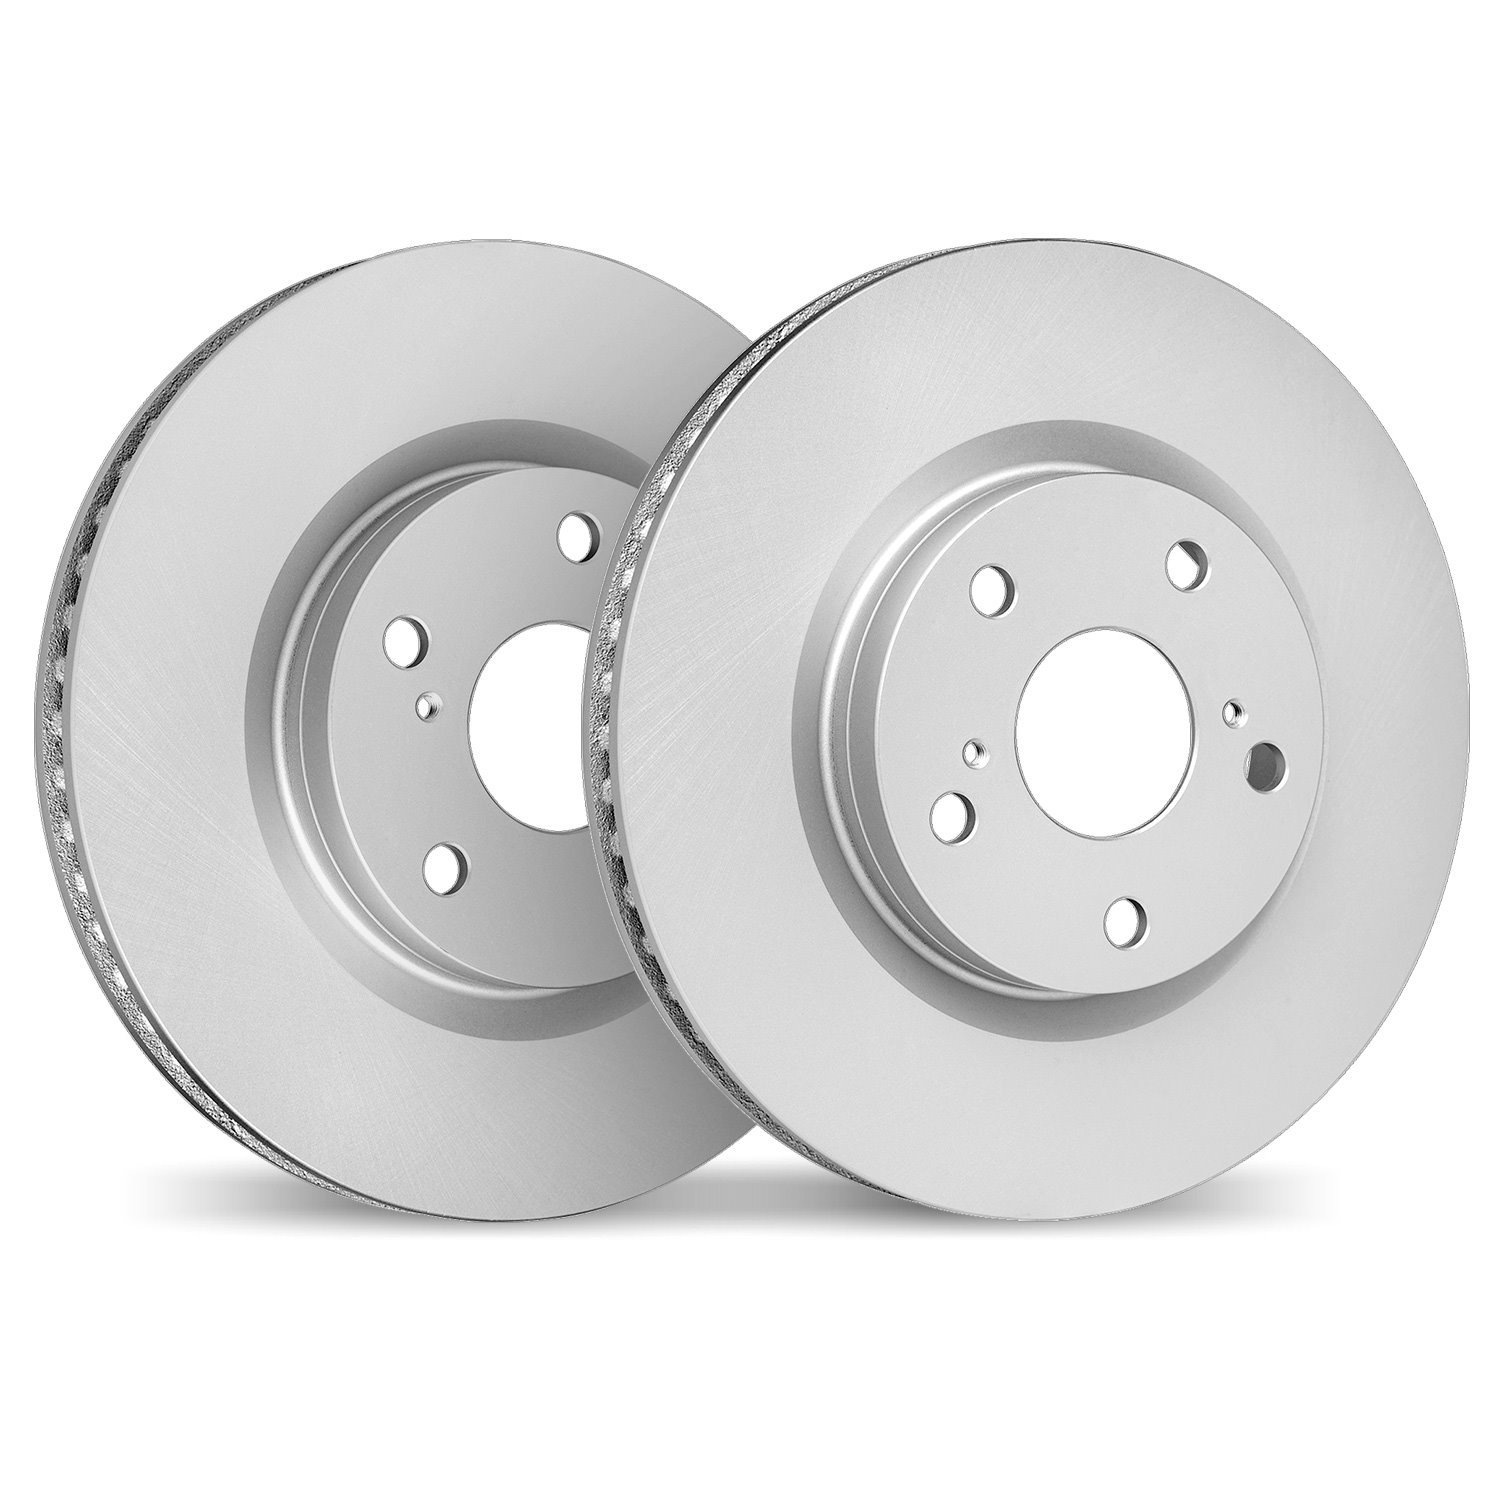 4002-80045 Geospec Brake Rotors, Fits Select Ford/Lincoln/Mercury/Mazda, Position: Front